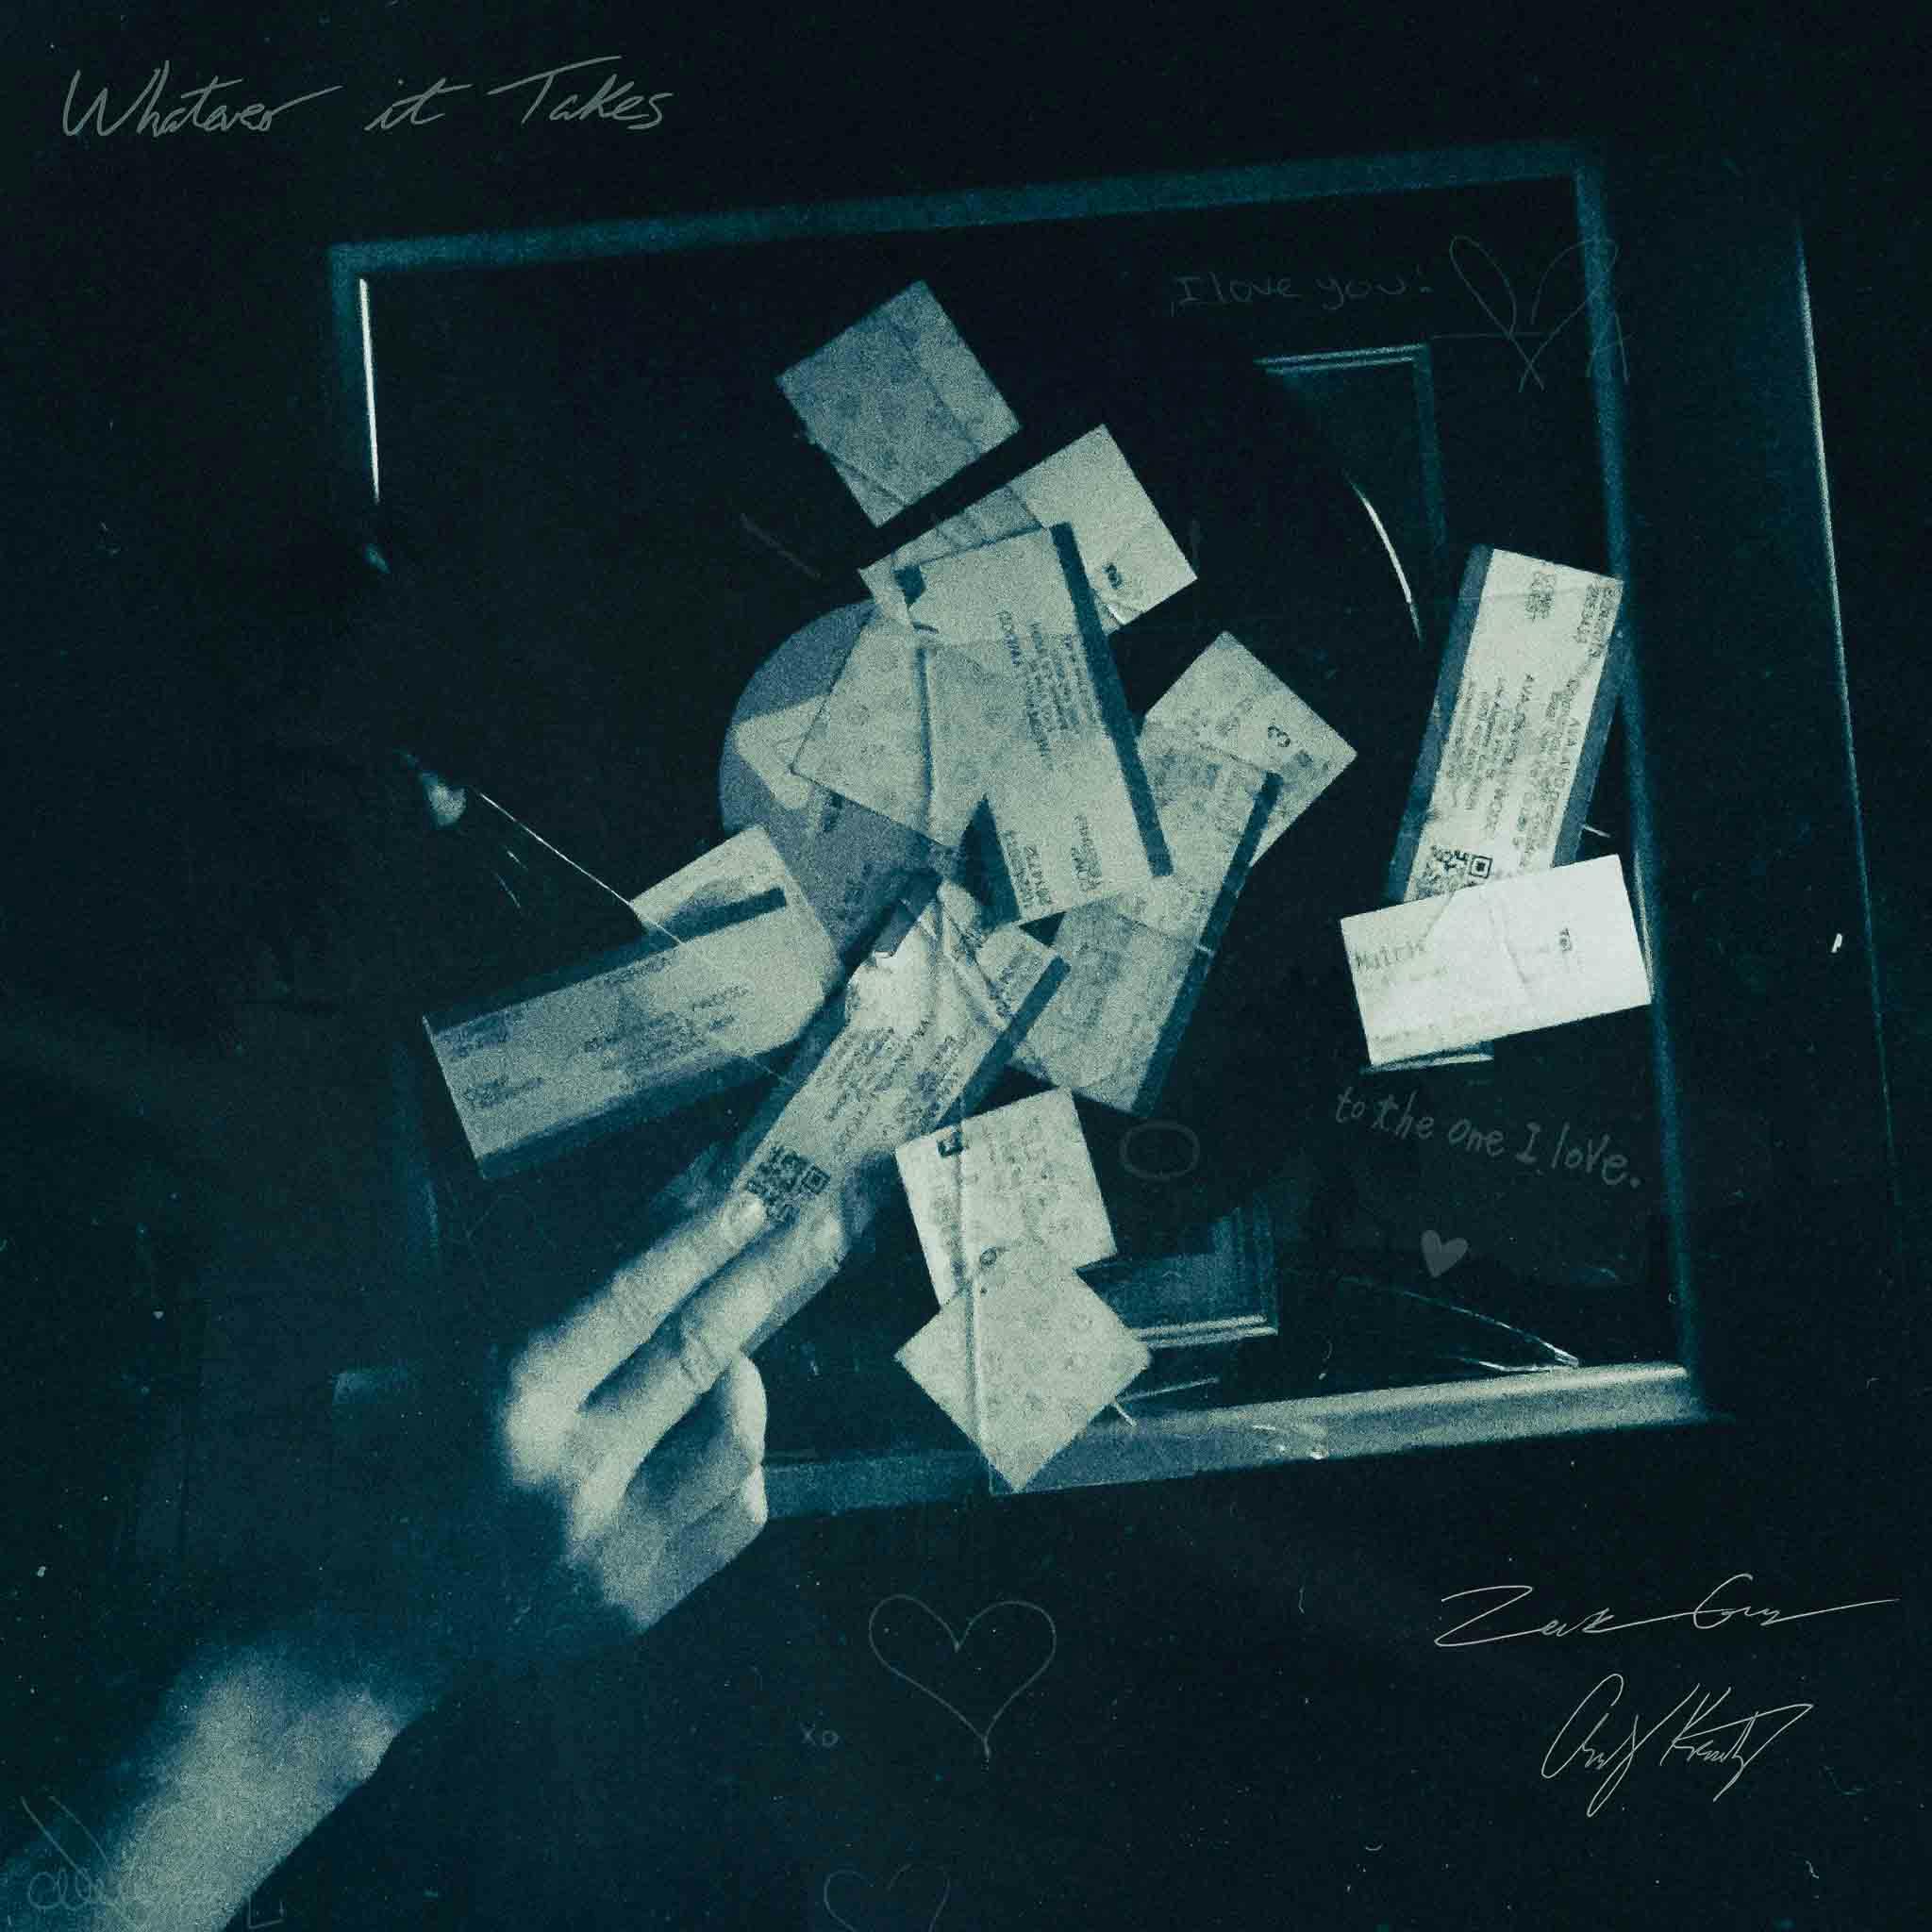 'Whatever it Takes' official artwork by Zack Gray and Andy Kautz